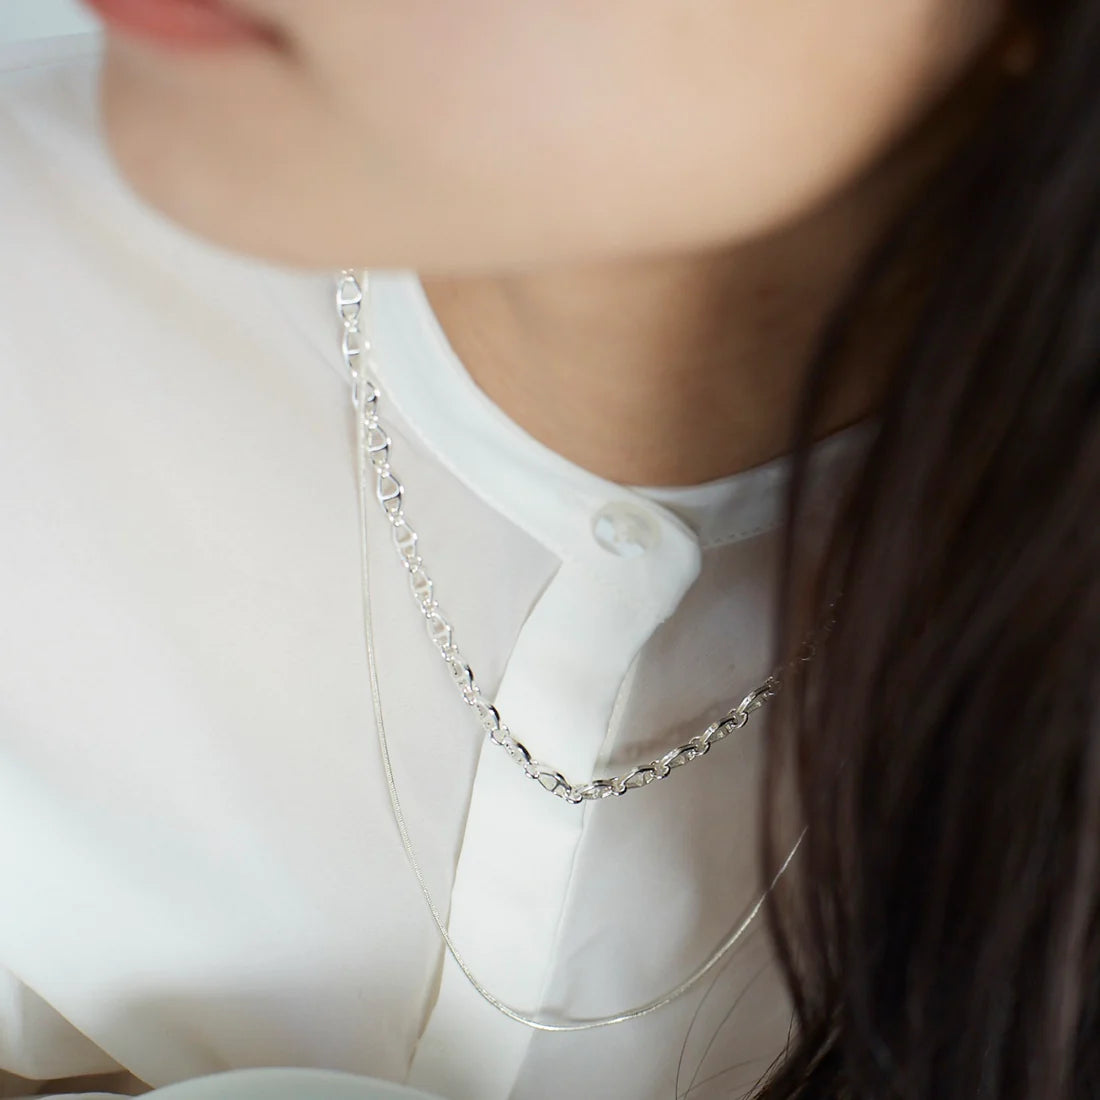 Nothing And Others / W Chain Necklace